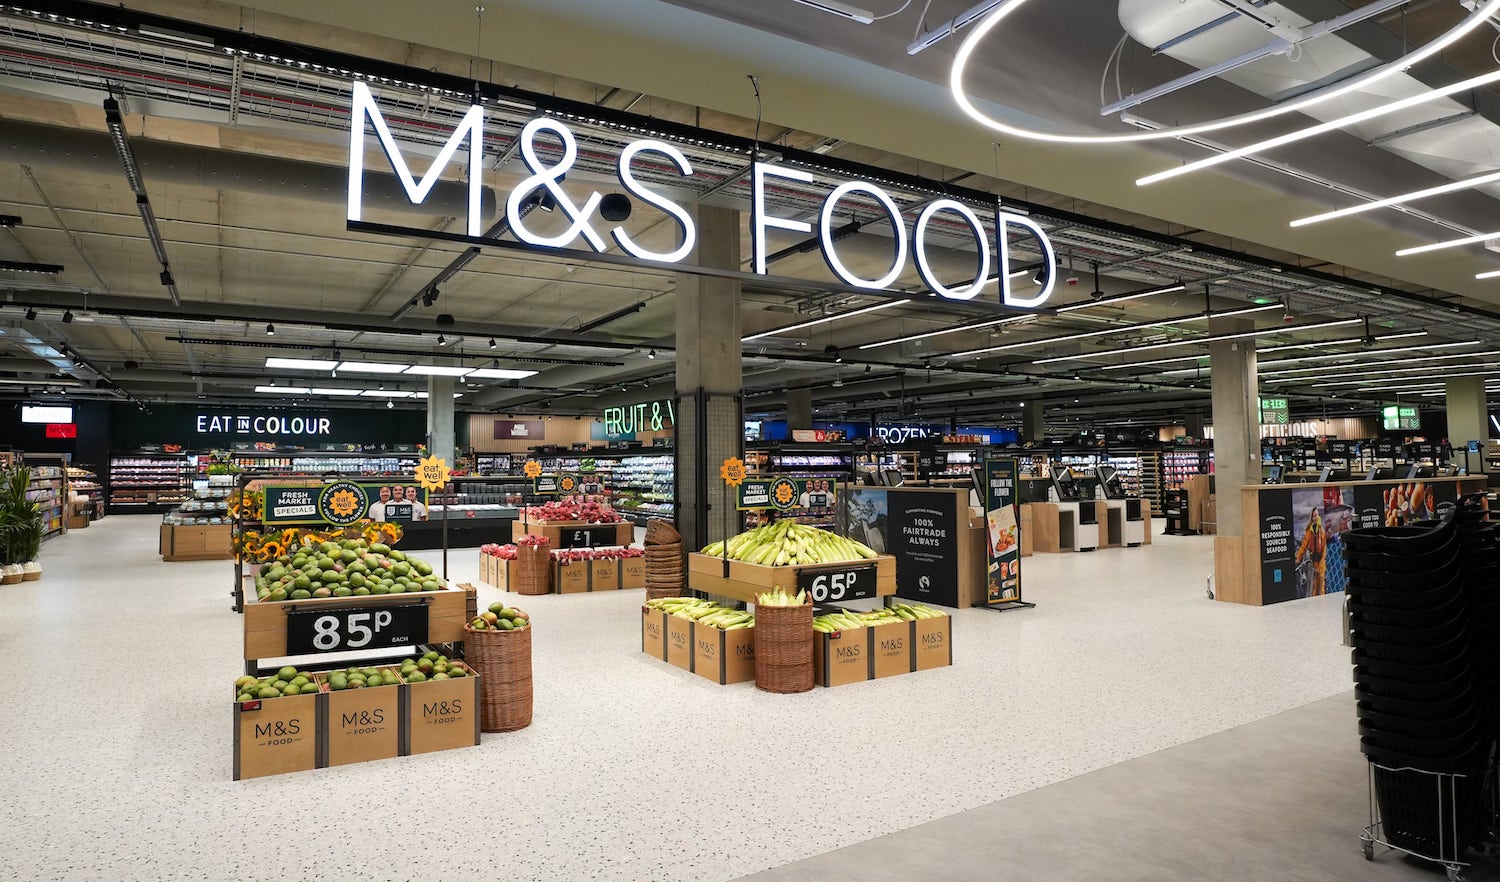 Show stopping new M&S store opens at Liverpool ONE - Retail Focus